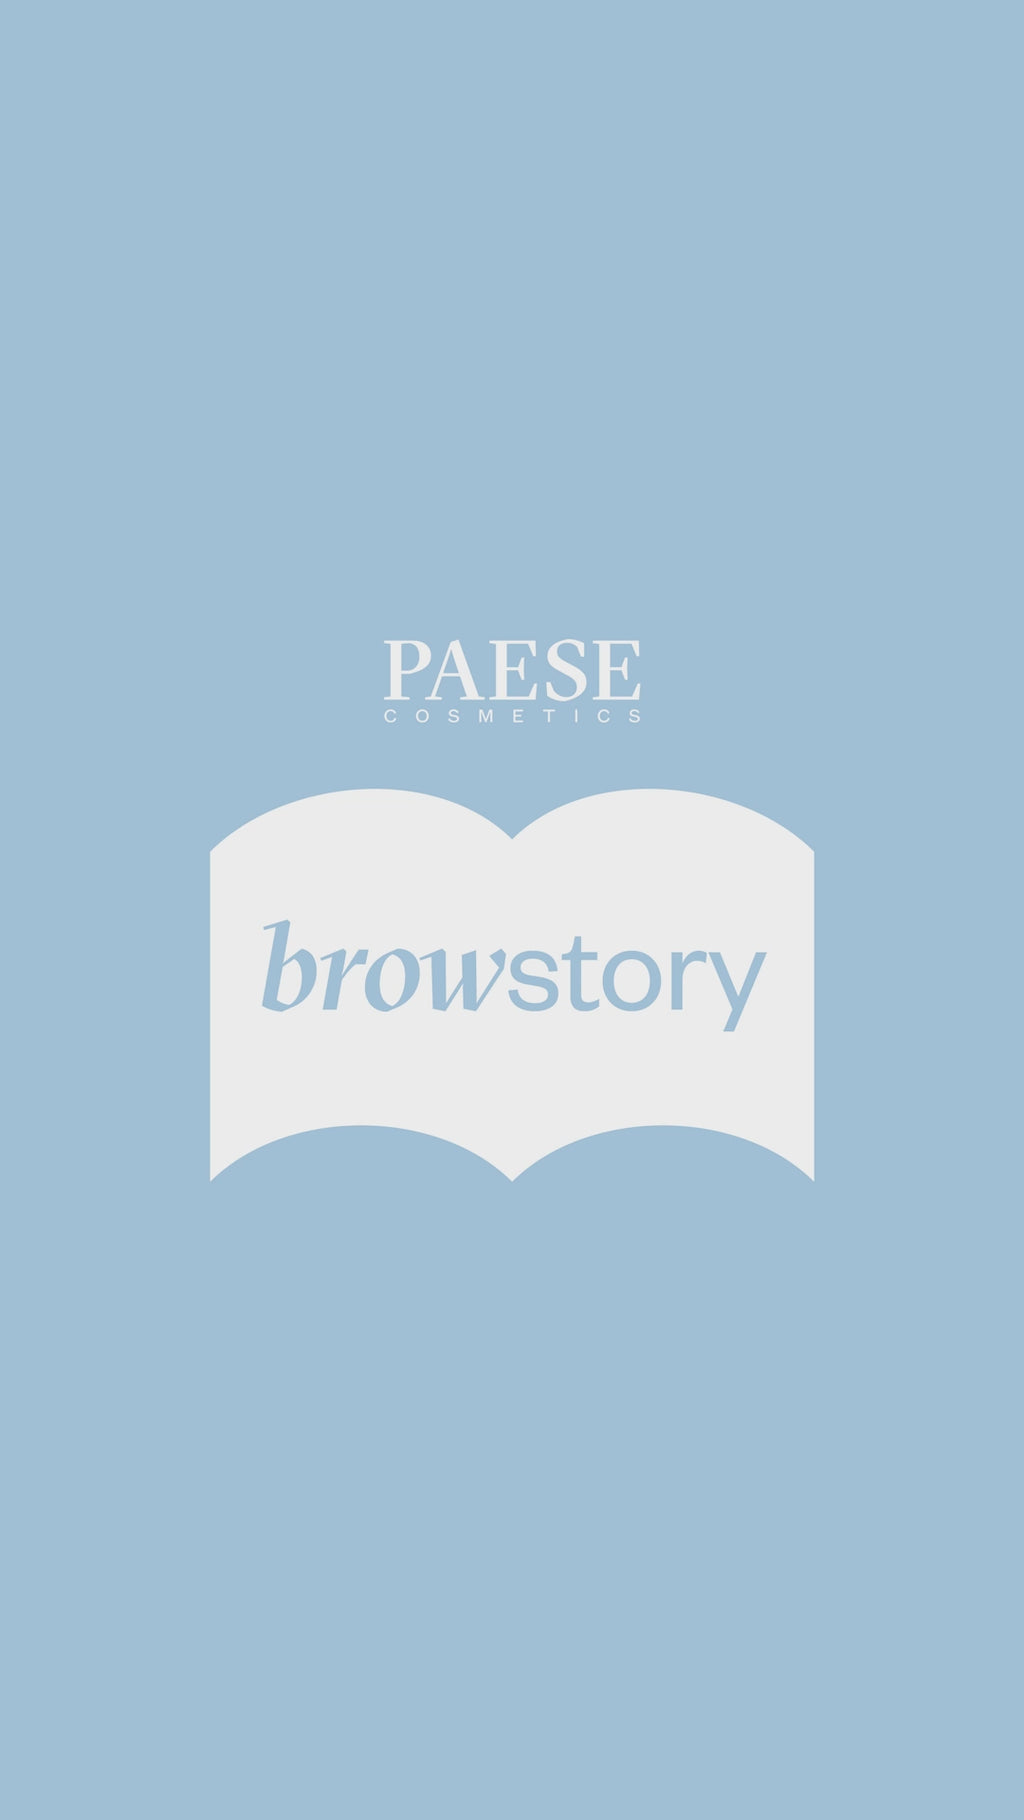 PAESE | Browstory Brow Gel video directions